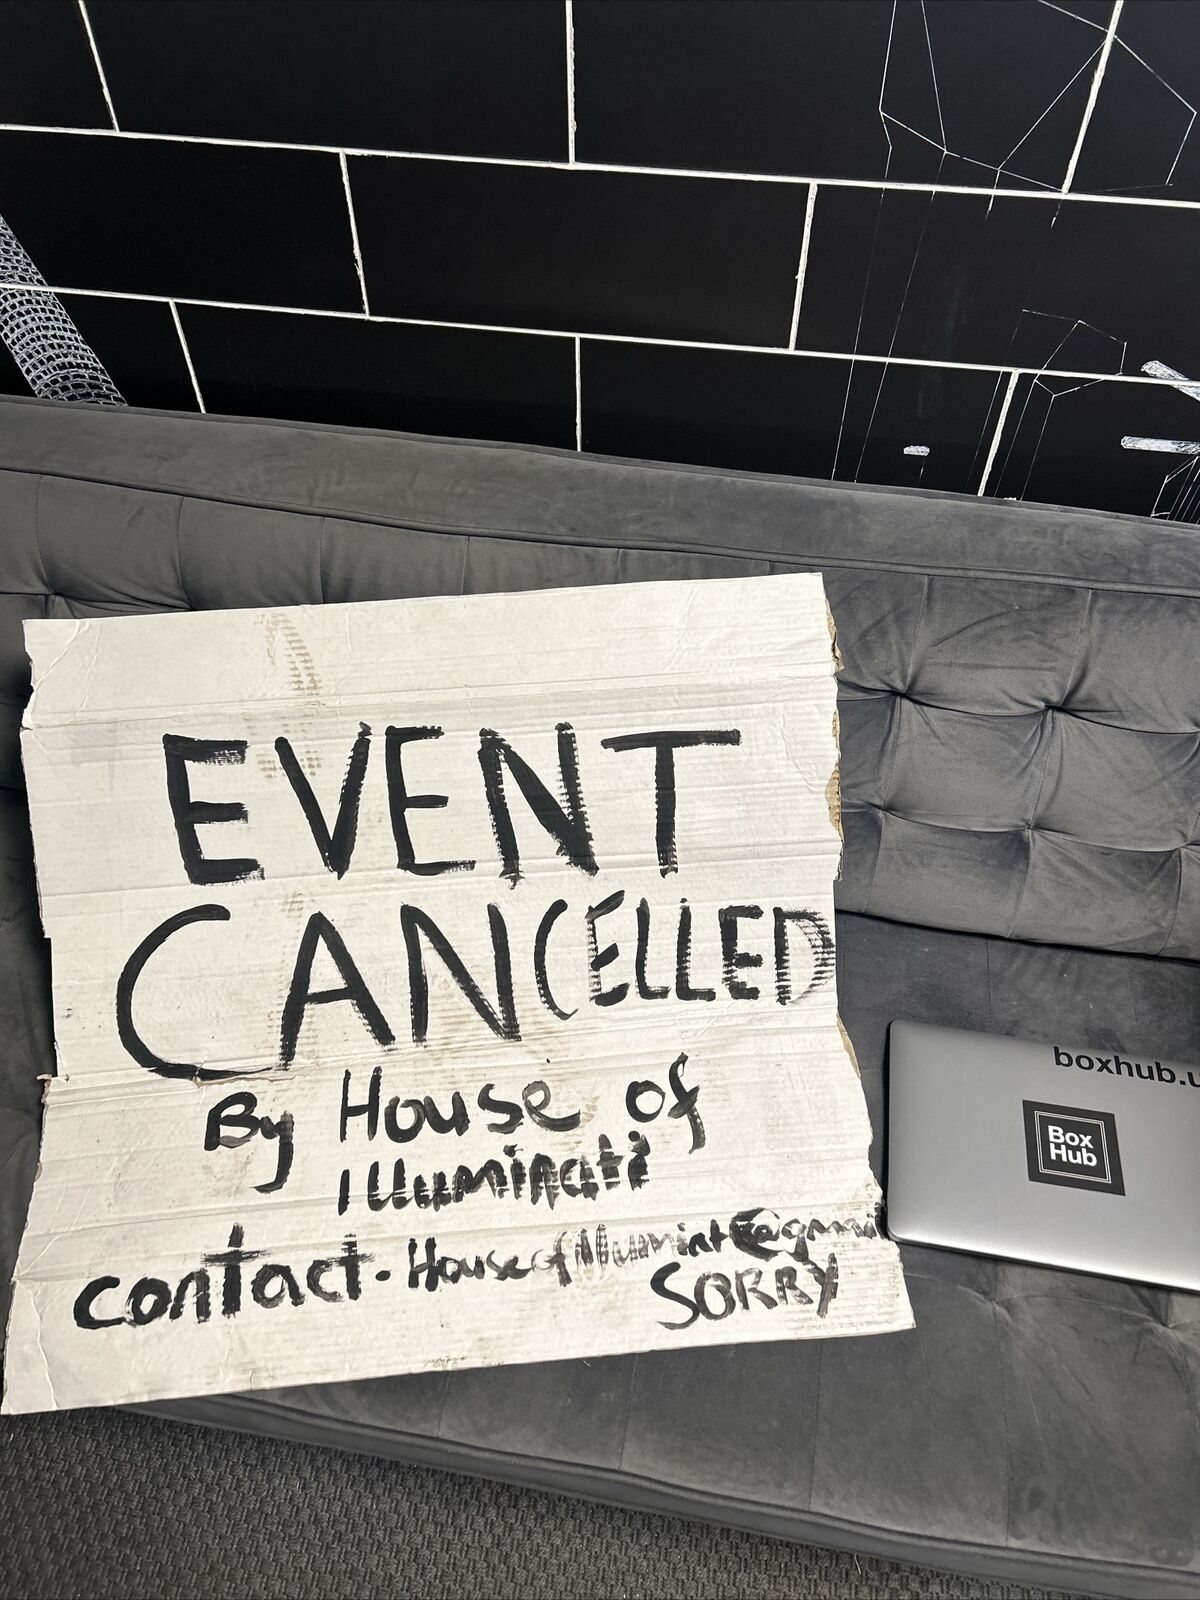 Box Hub say they will donate proceeds from cancelled sign to Glasgow Children's Hospital Charity. Photo: Ebay.